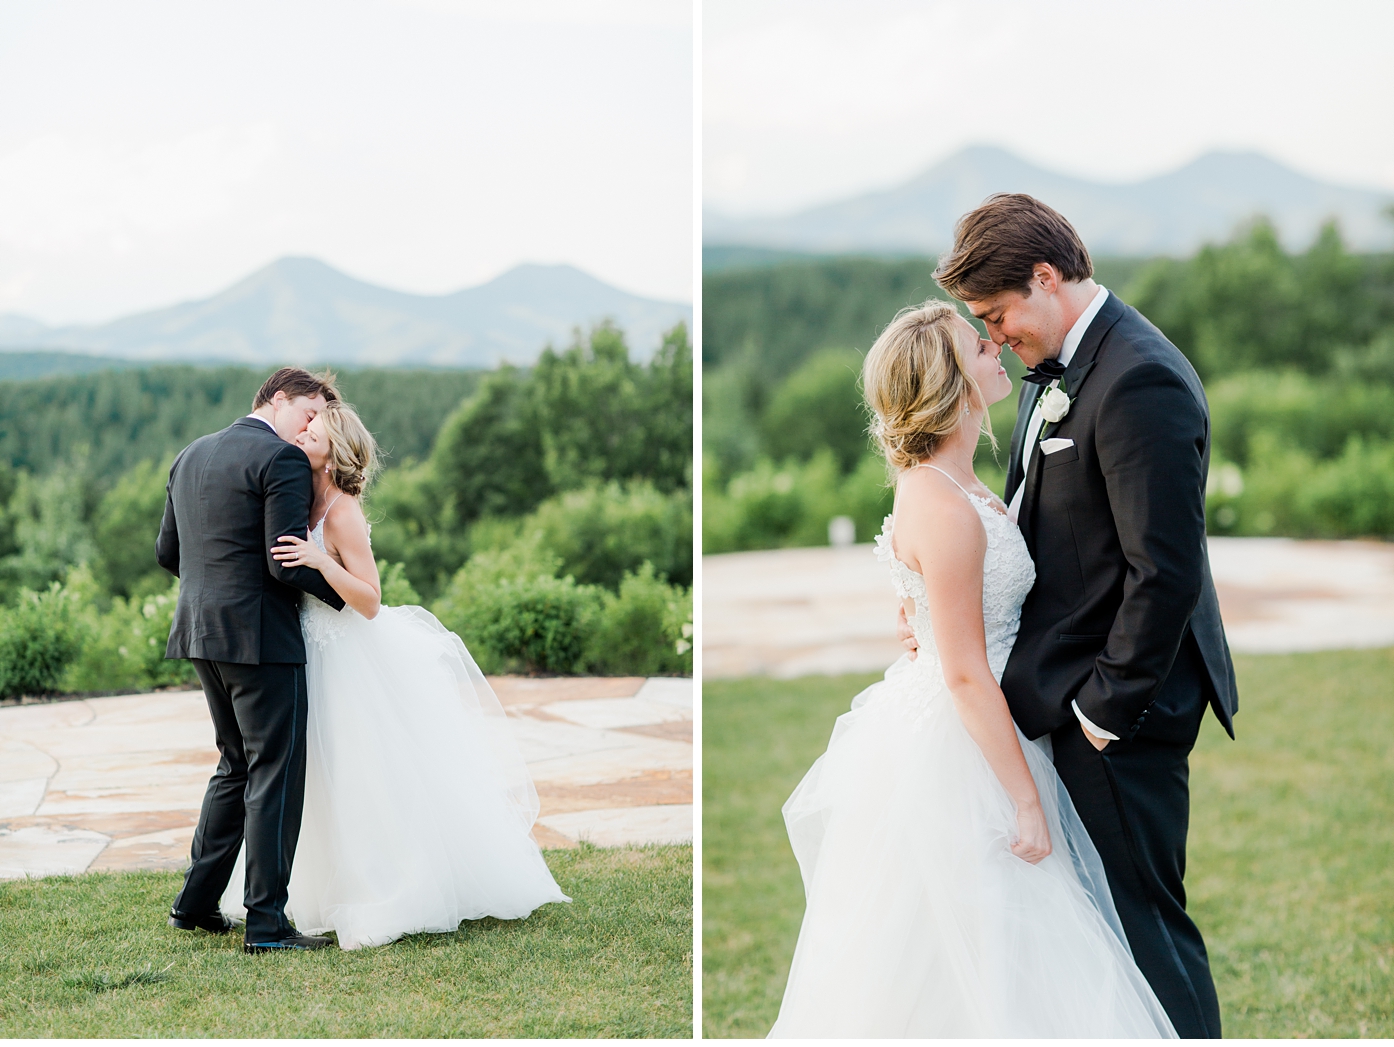 Blueridge Mountain Wedding in Lexington Virginia at The Seclusion by Alisandra Photography